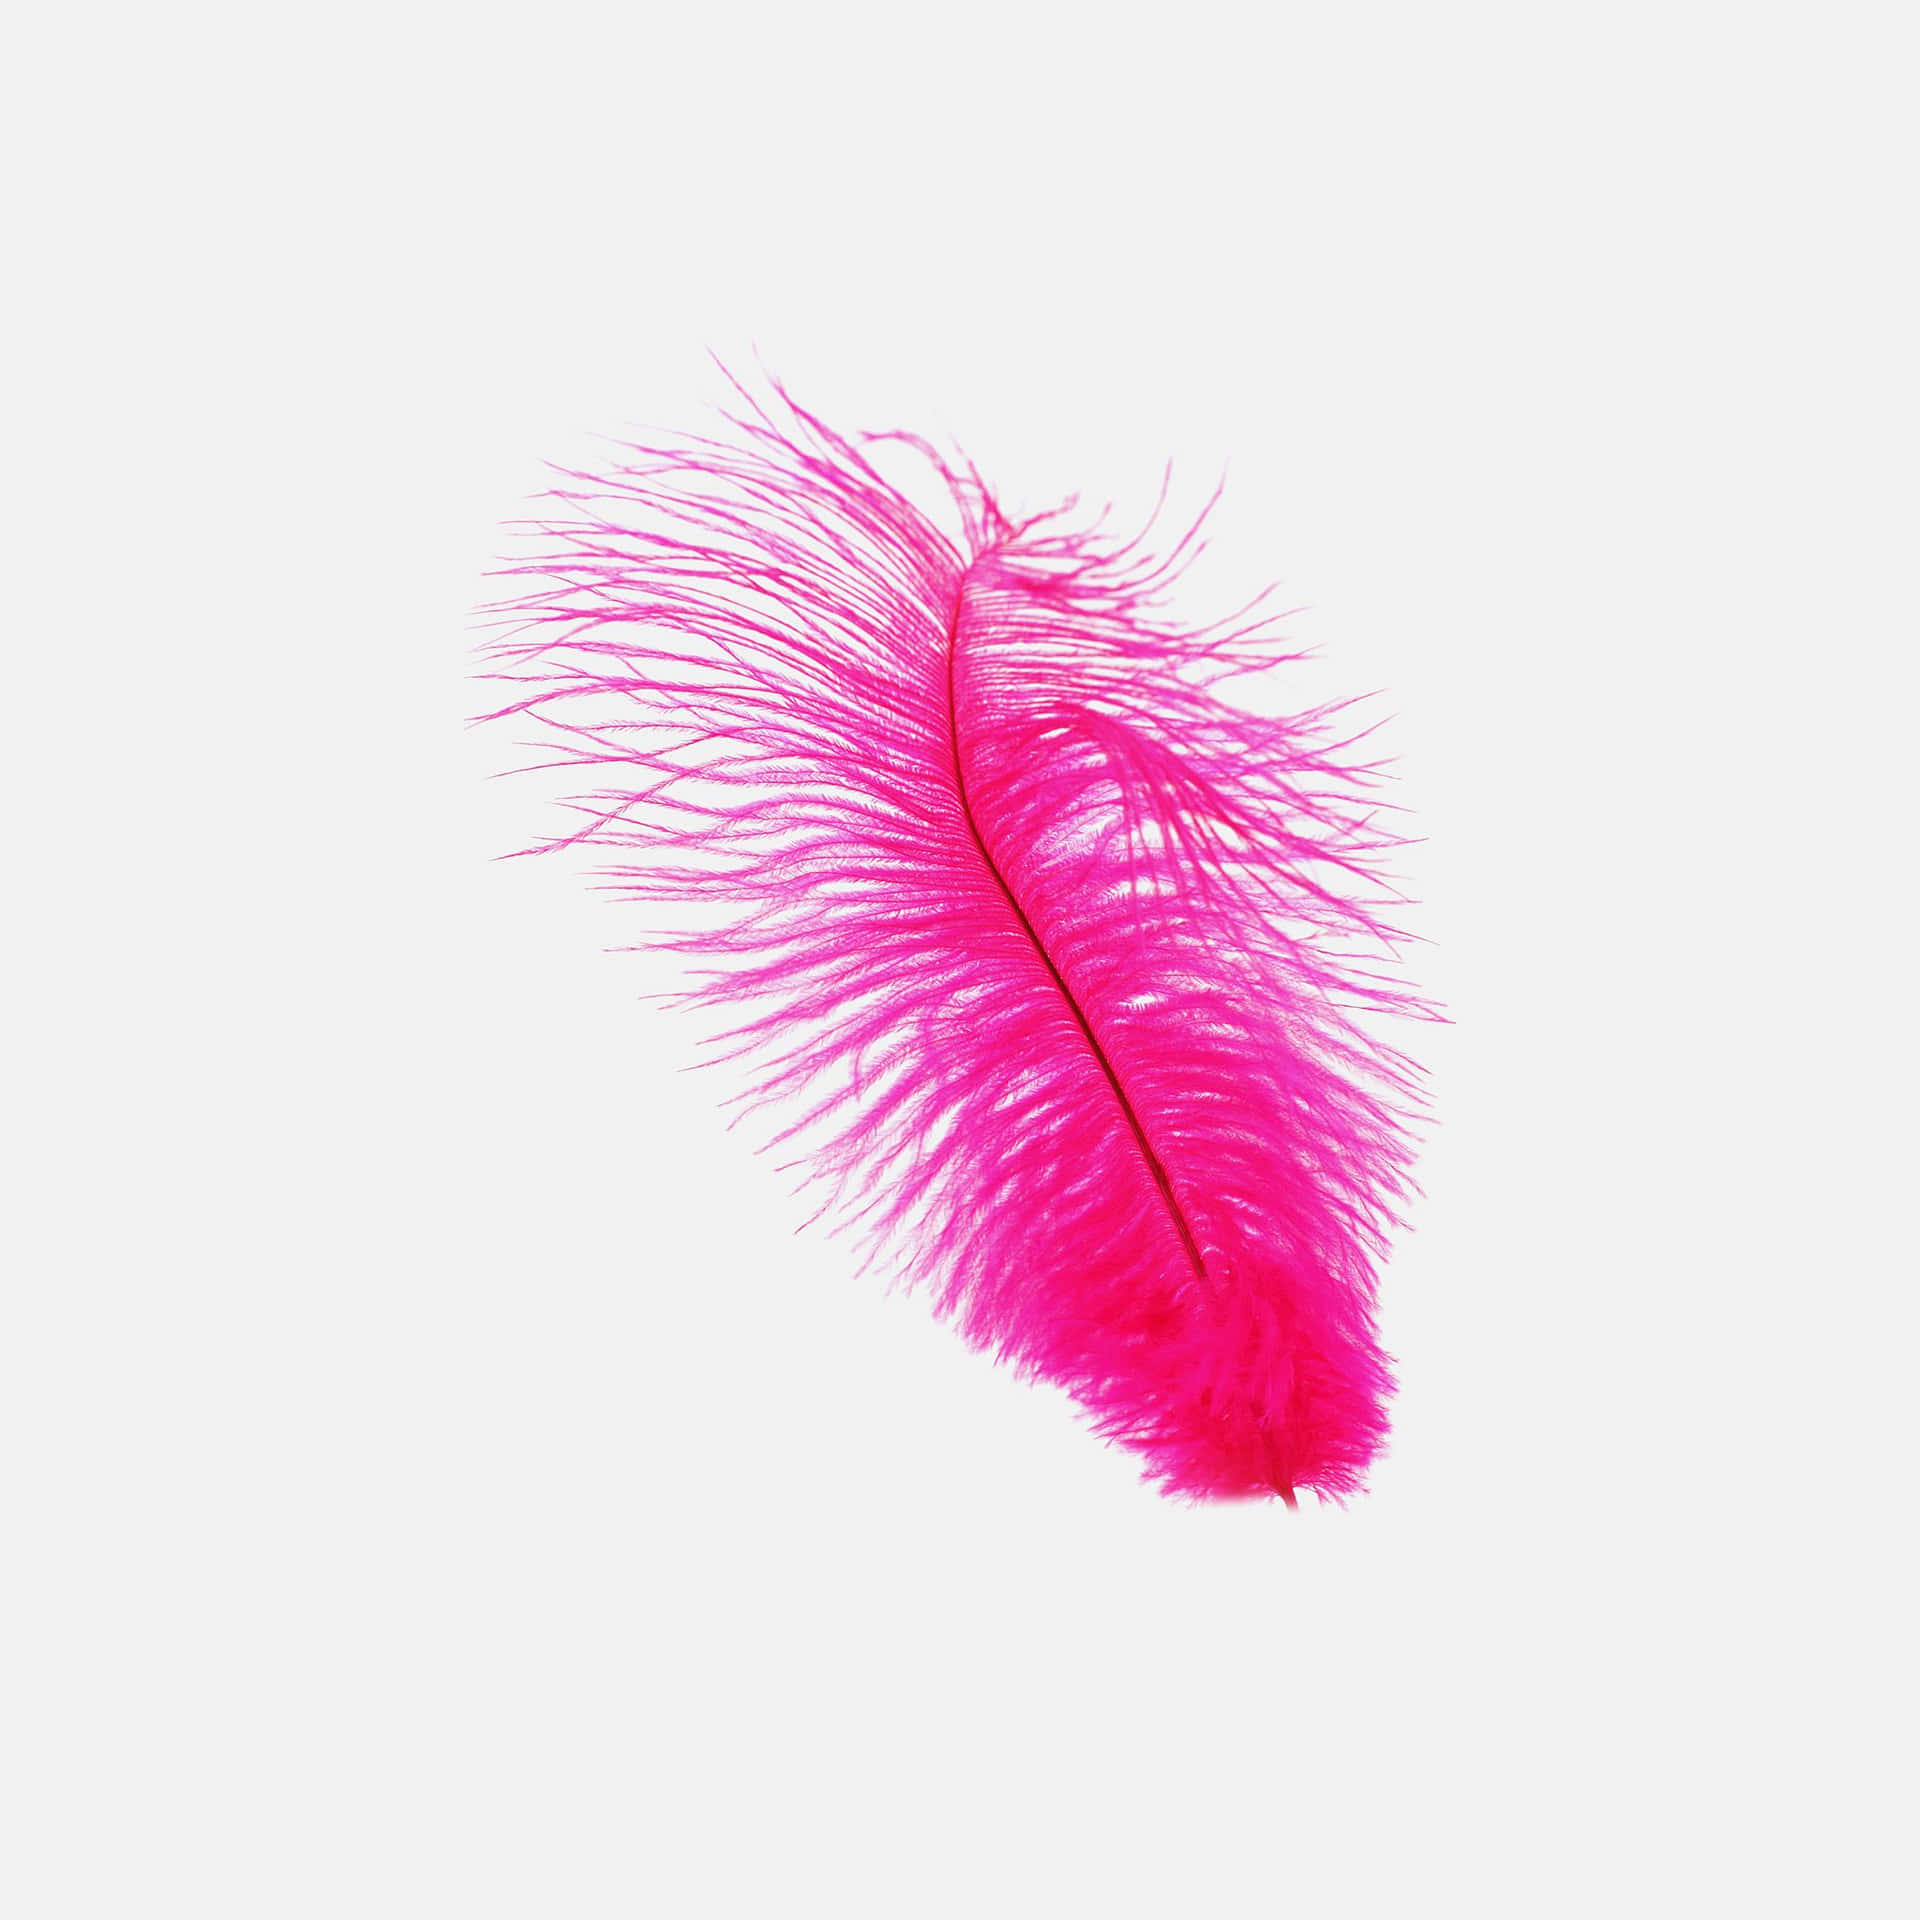 A Pink Feather On A White Background